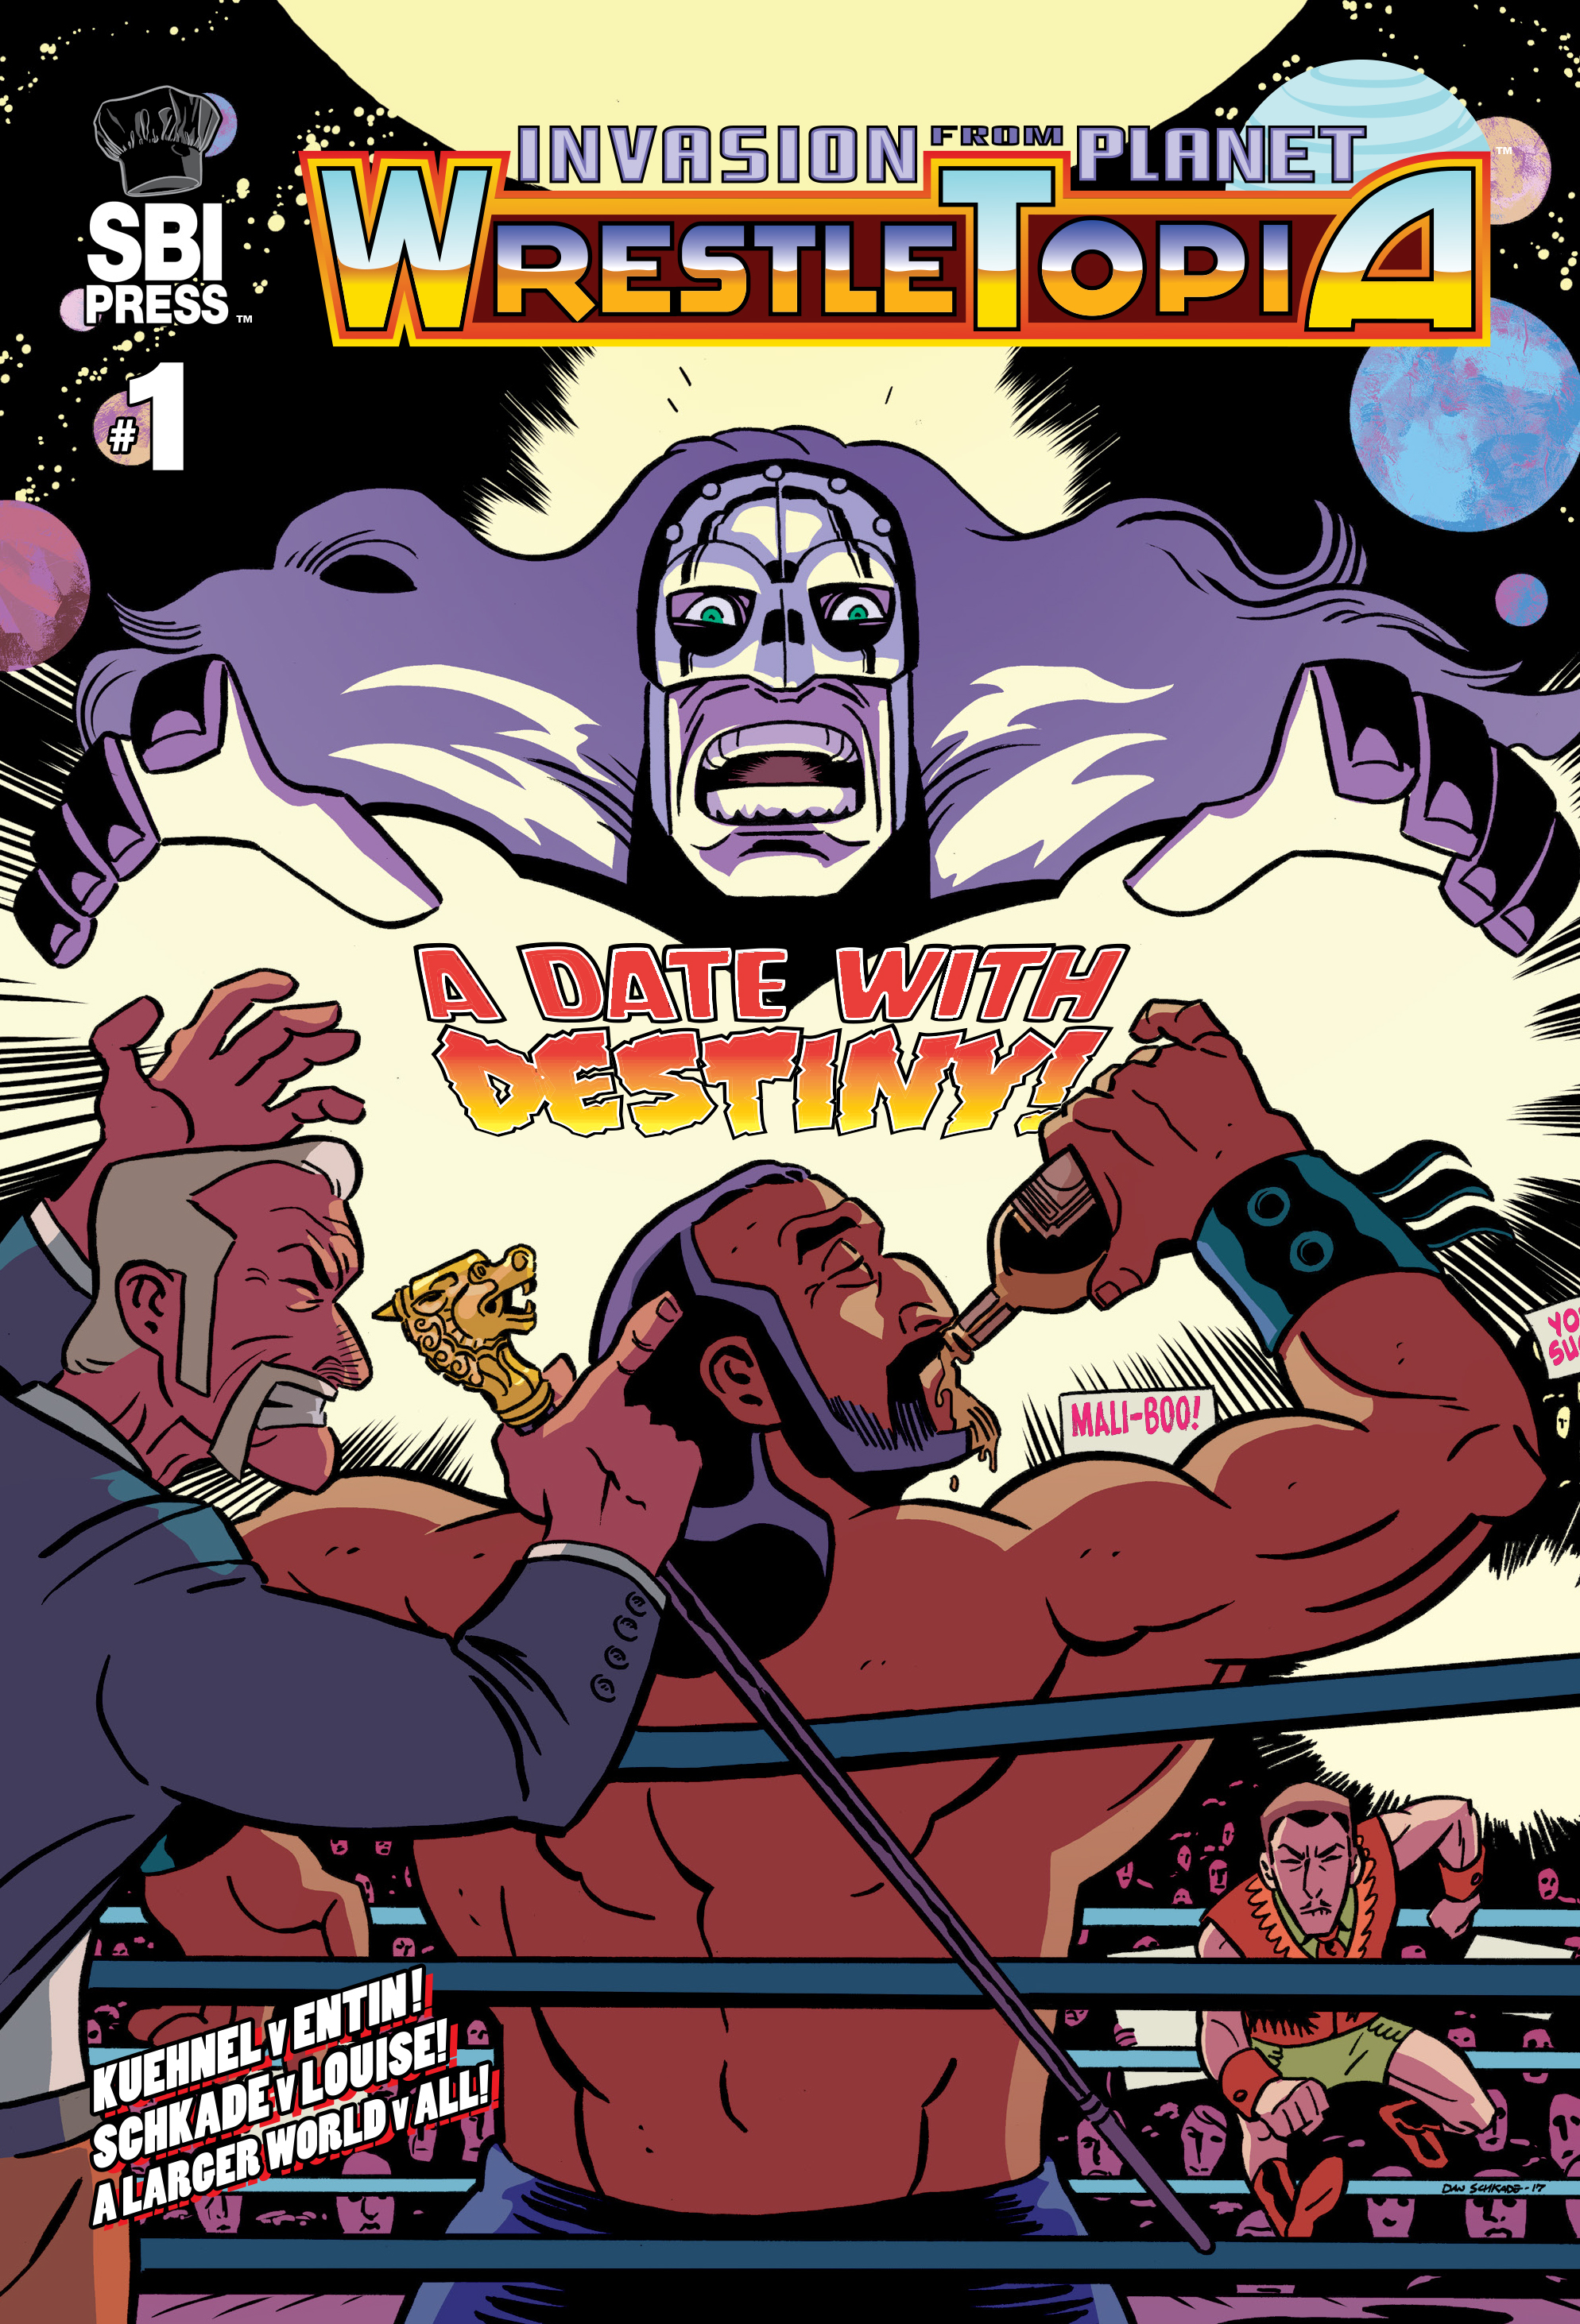 Read online Invasion from Planet Wrestletopia comic -  Issue #1 - 1